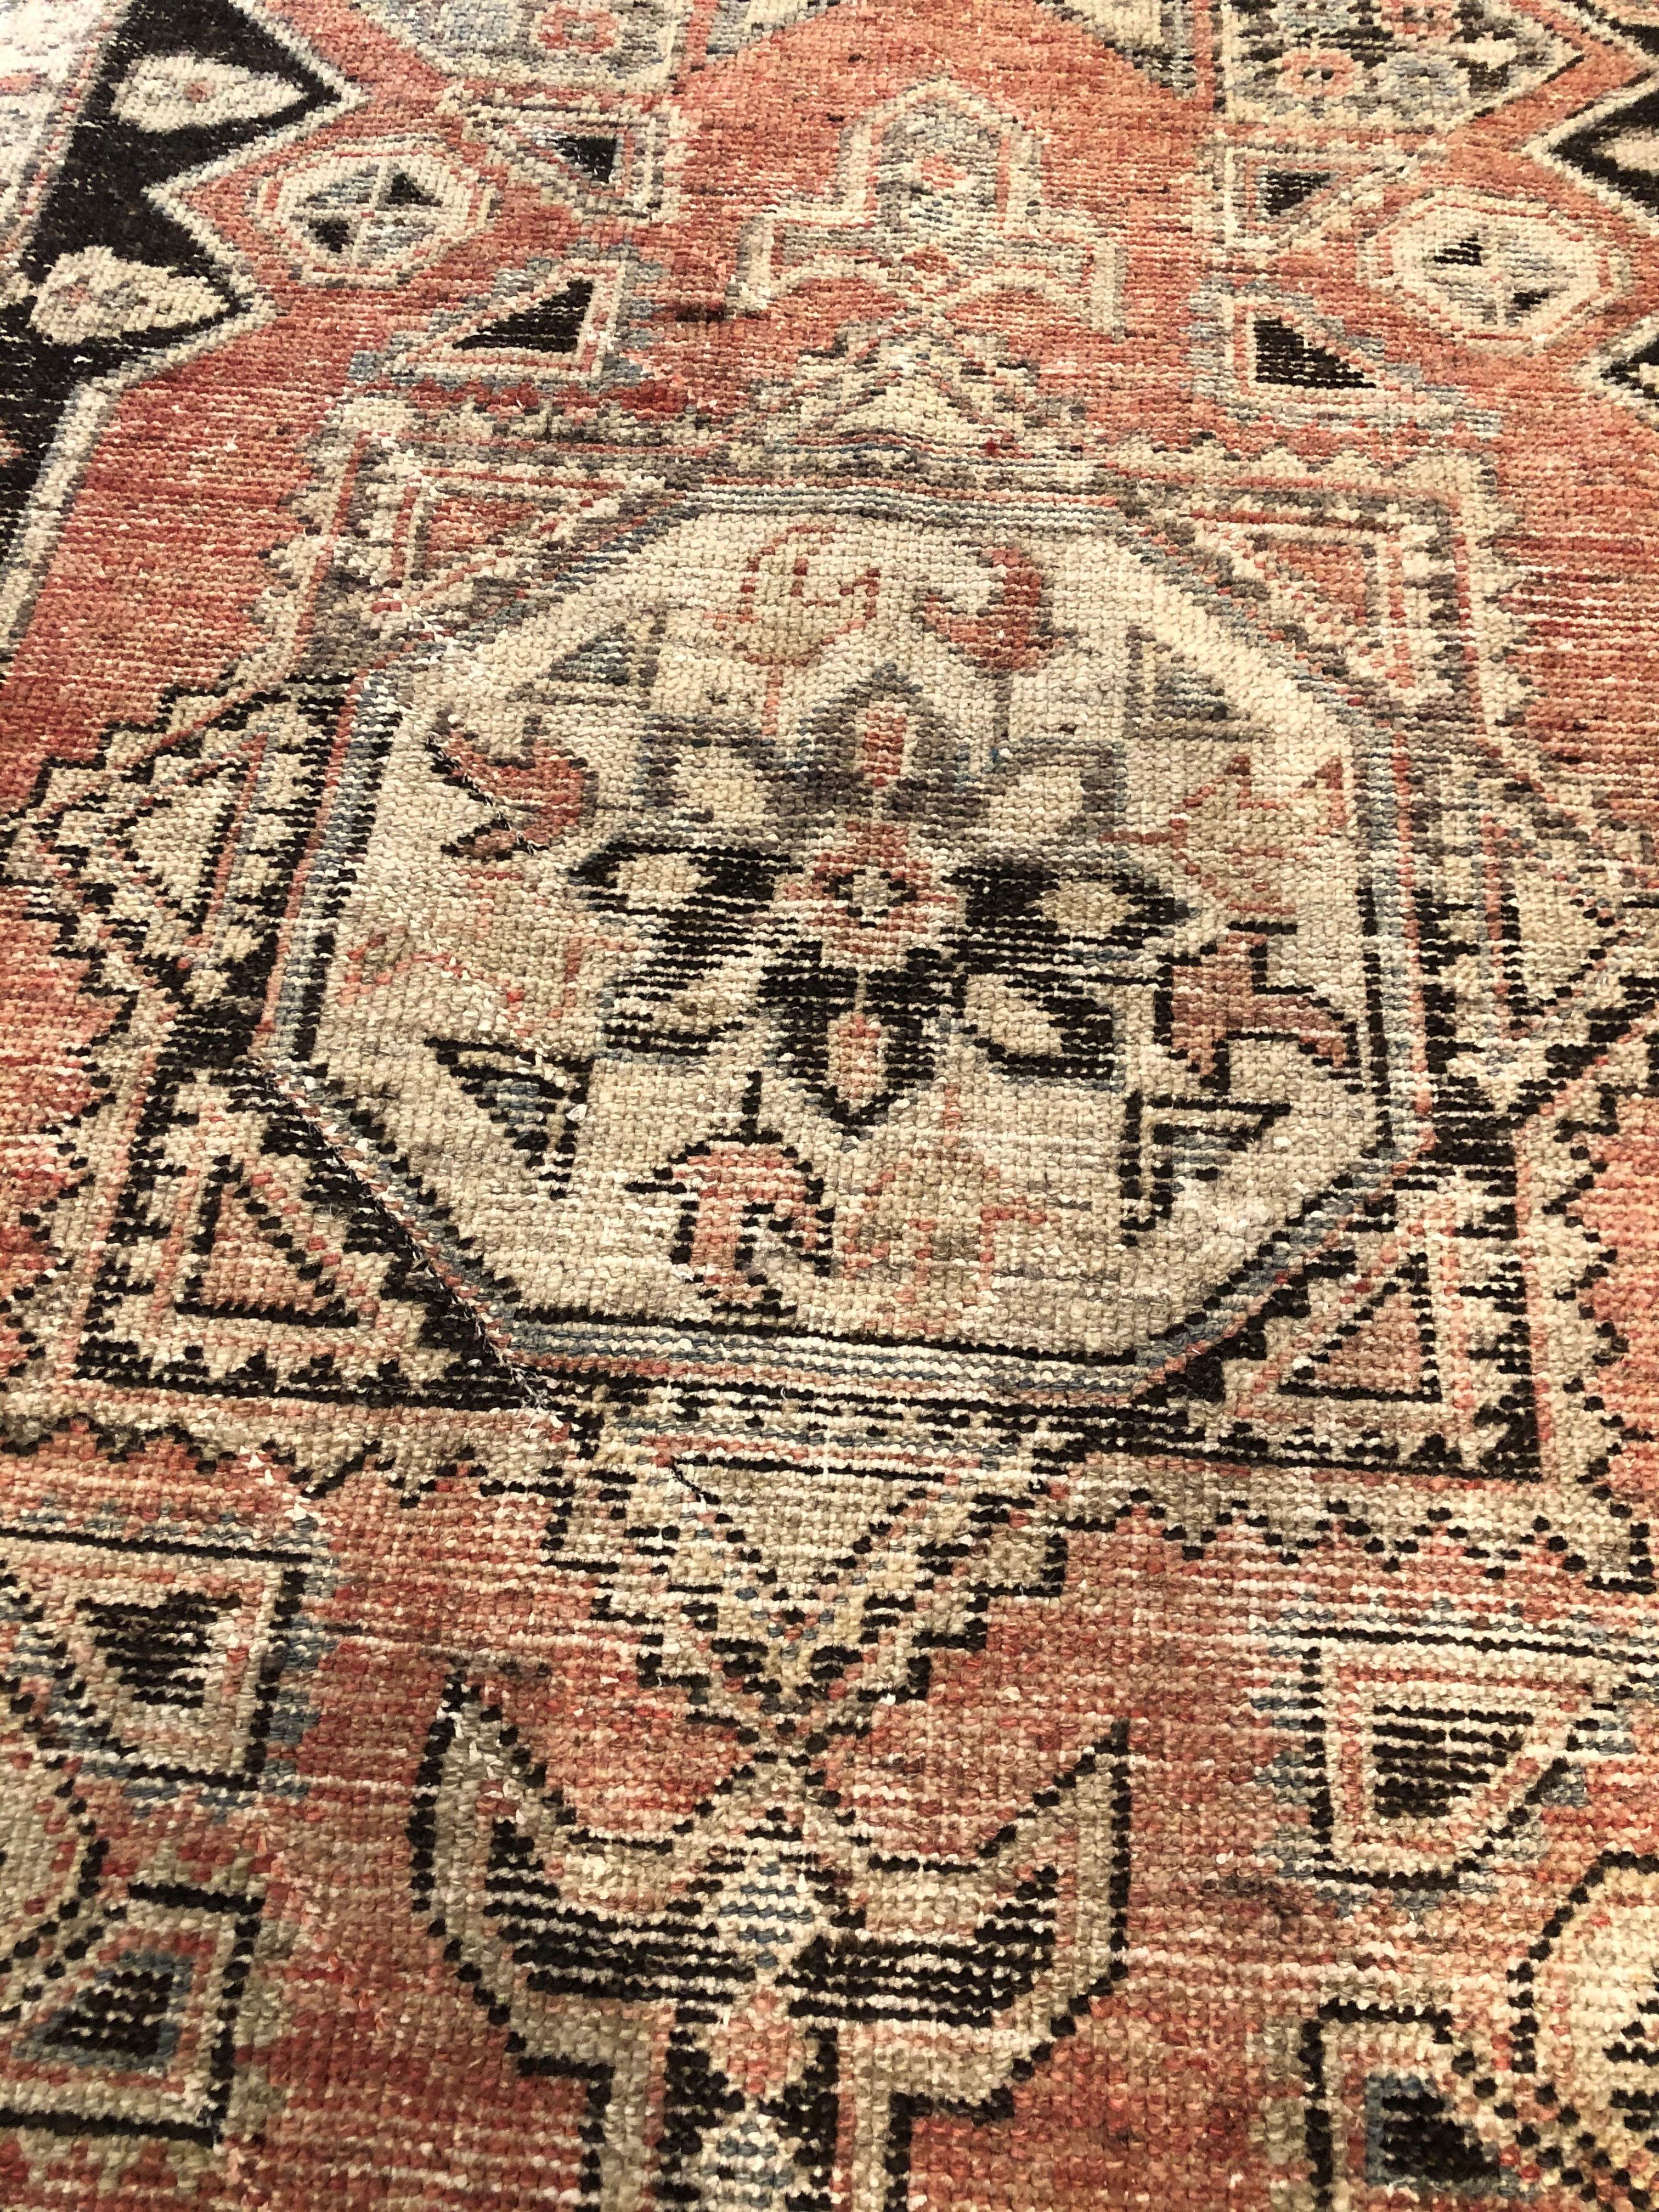 Mid 20th Century Wool Hand Knotted Turkish Oushak Soft Pink and Brown Rug

This Oushak rug has a beautiful pile and vegetable died colors that are soft and blended beautifully. Vintage with medallion design with a center flower, its country of